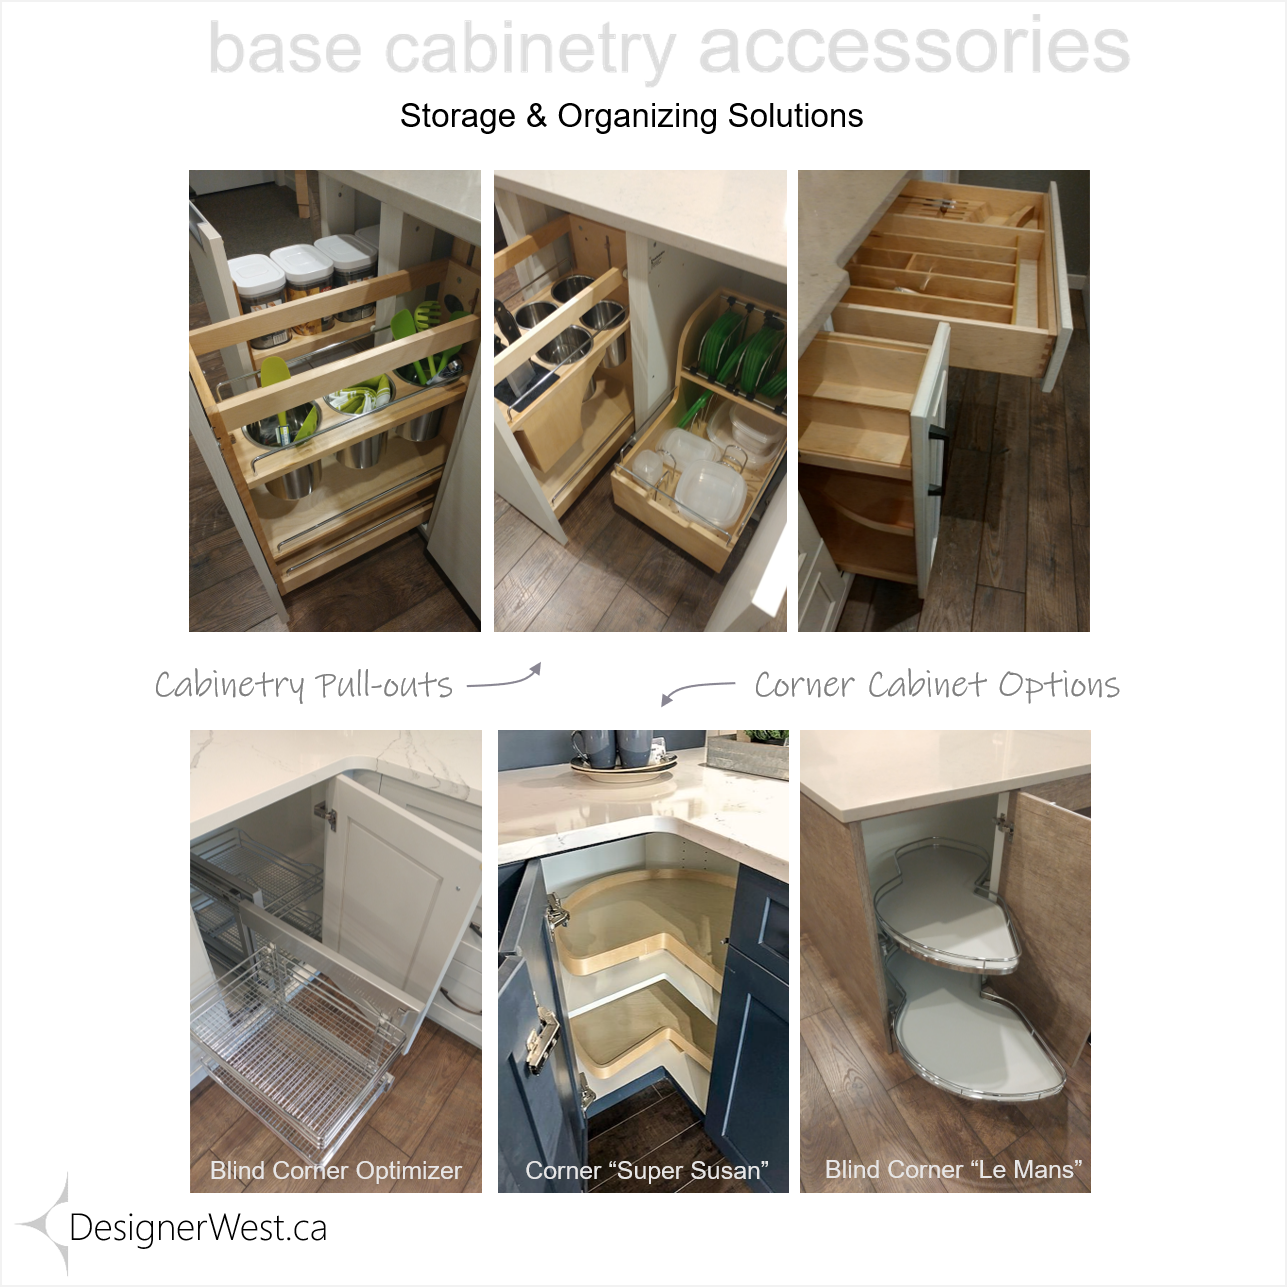 Storage for Base Cabinets